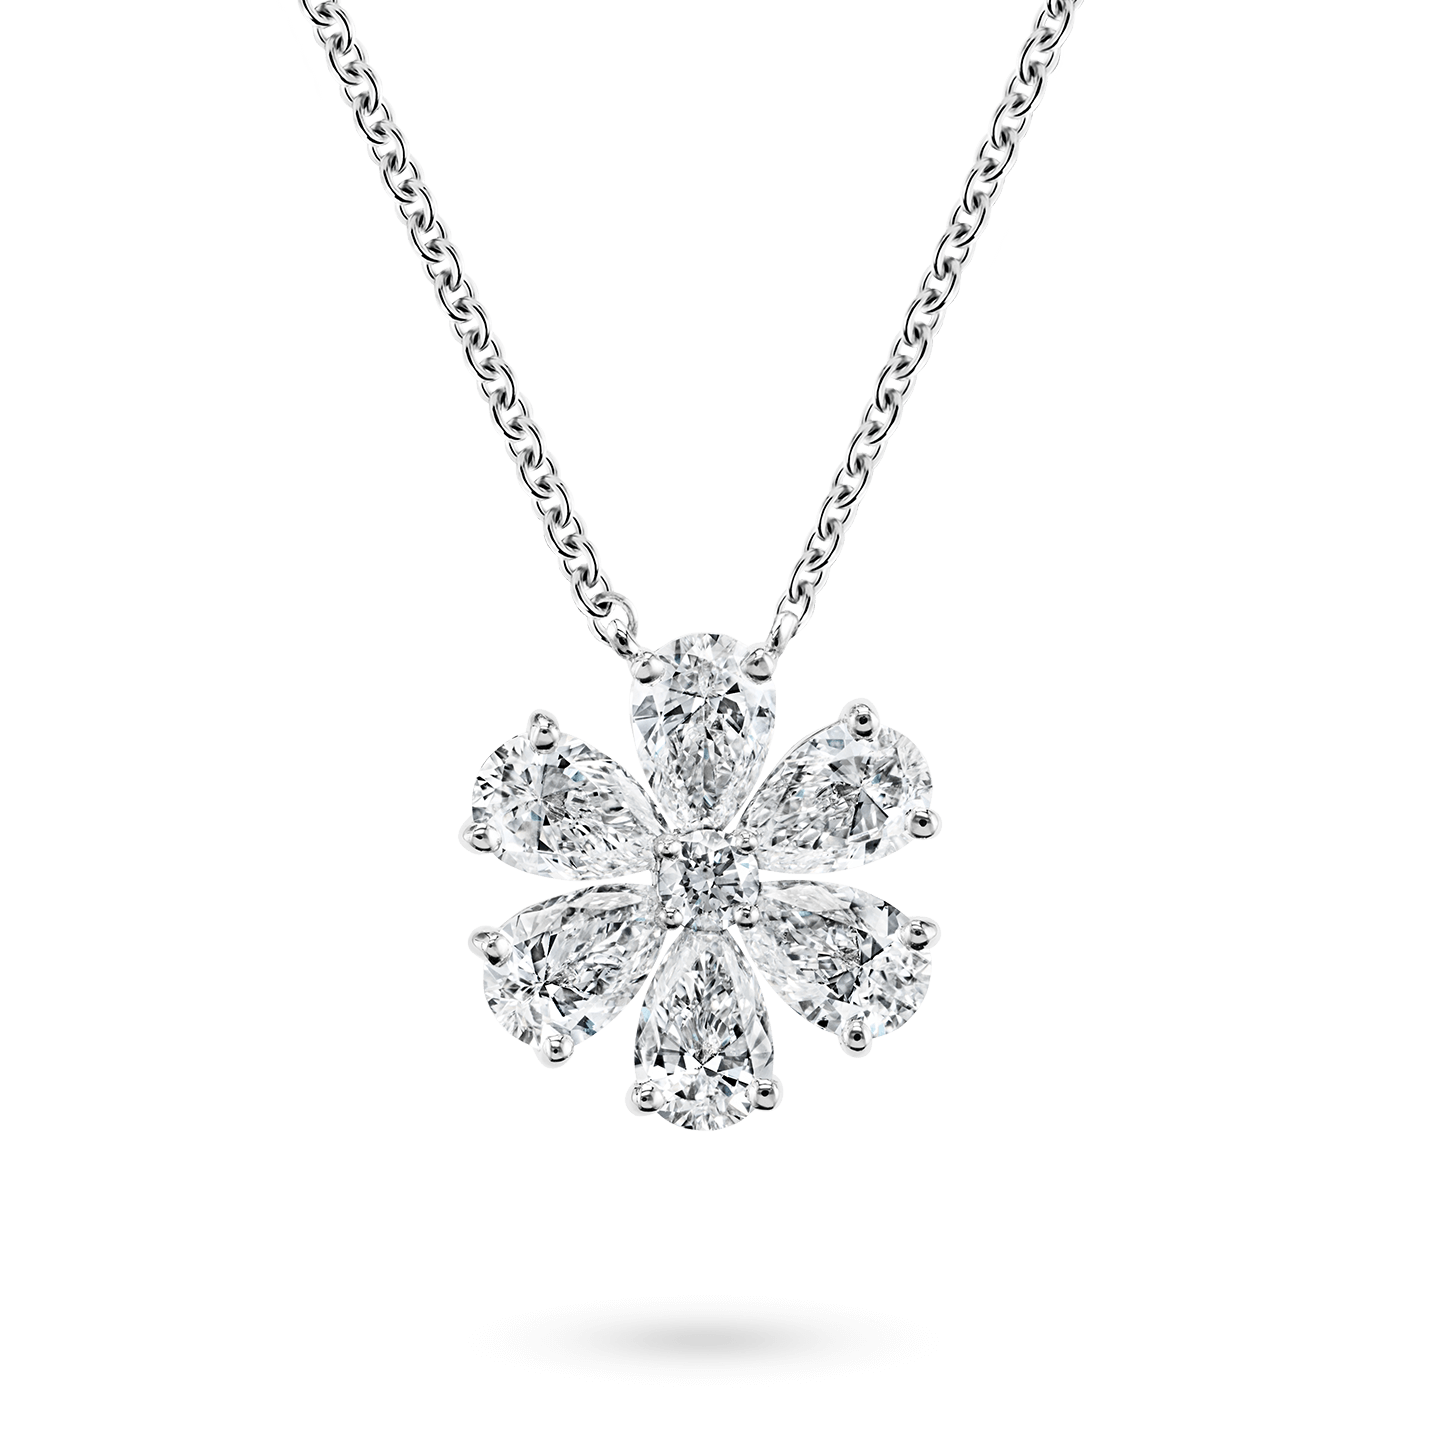 Forget-Me-Not Diamond Pendant, Product Image 1